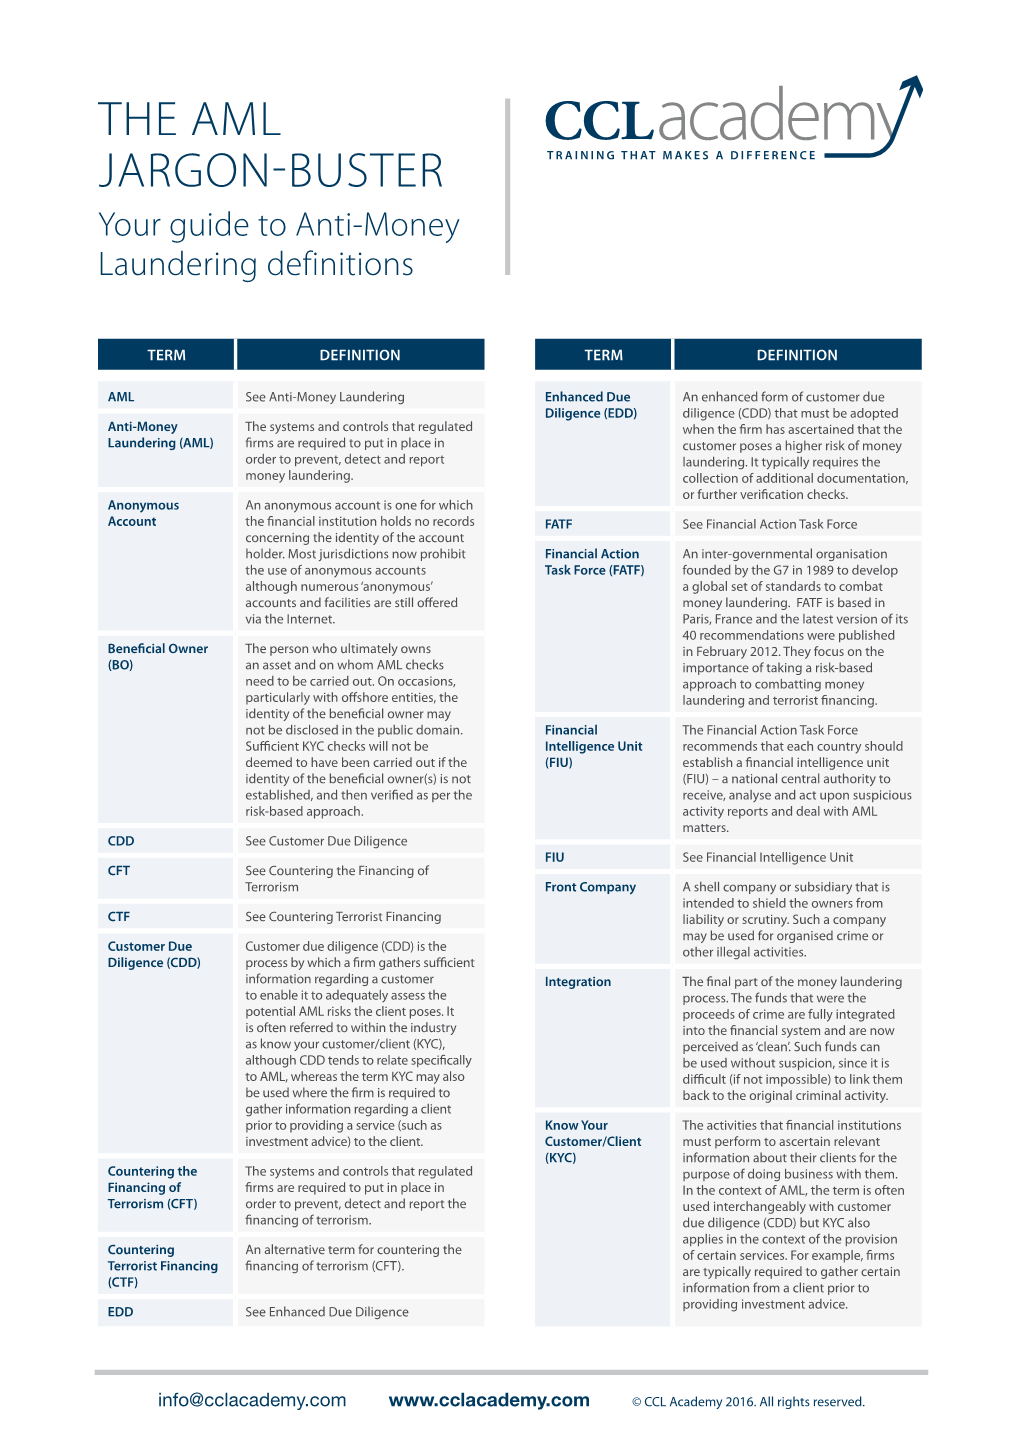 THE AML JARGON-BUSTER Your Guide to Anti-Money Laundering Definitions